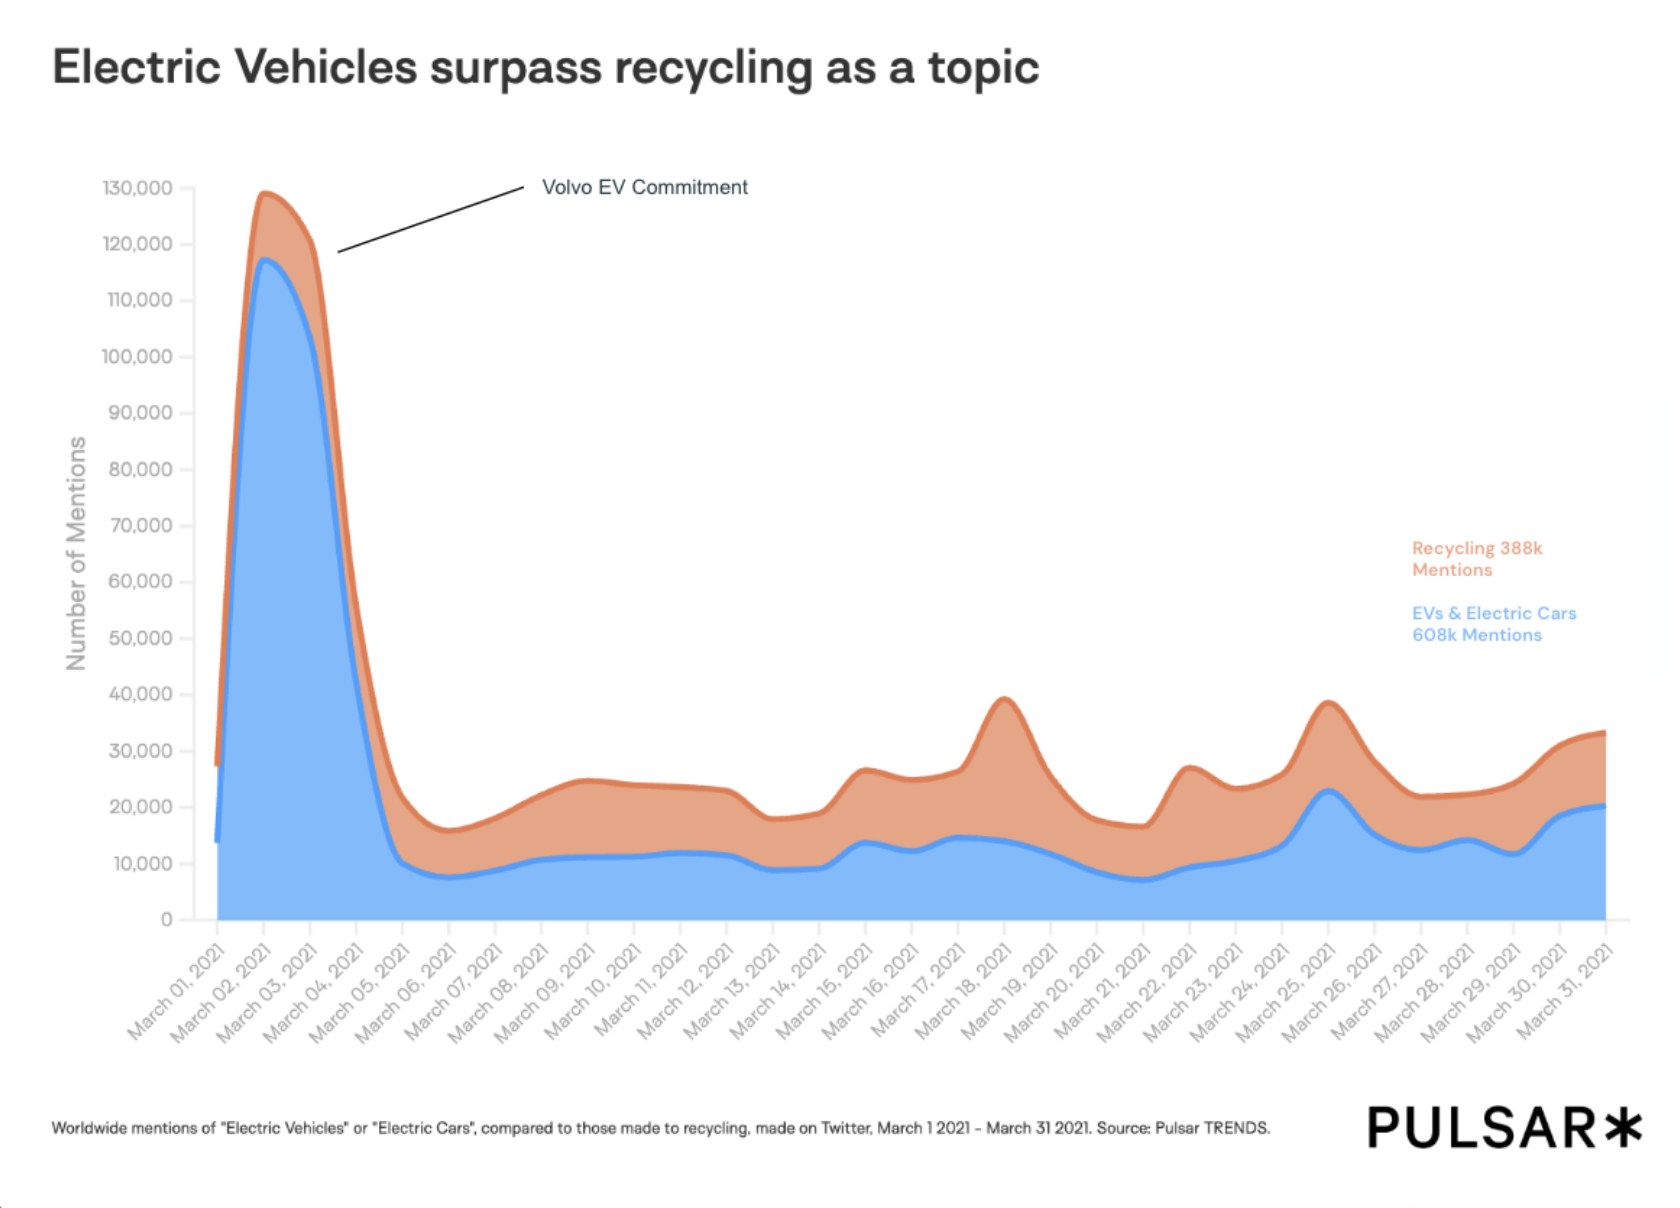 Electric vehicles vs recycling popularity